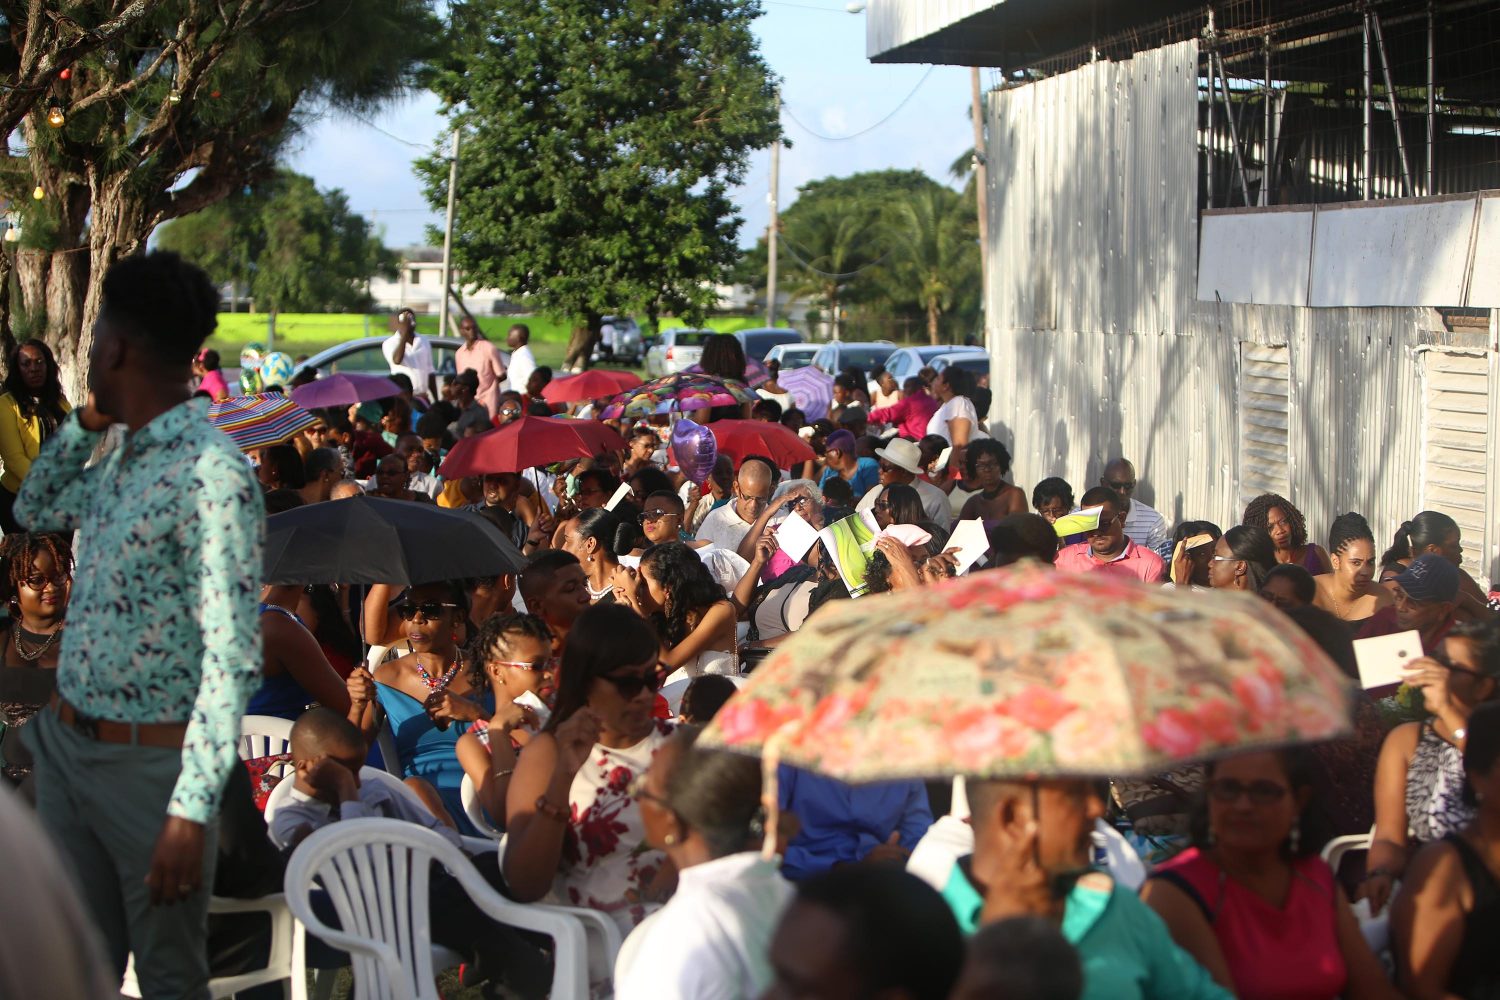 Family members sitting outside of the auditorium at the Sophia Exhibition Centre during the University of Guyana’s 51st Convocation yesterday afternoon. Photo by Keno George)